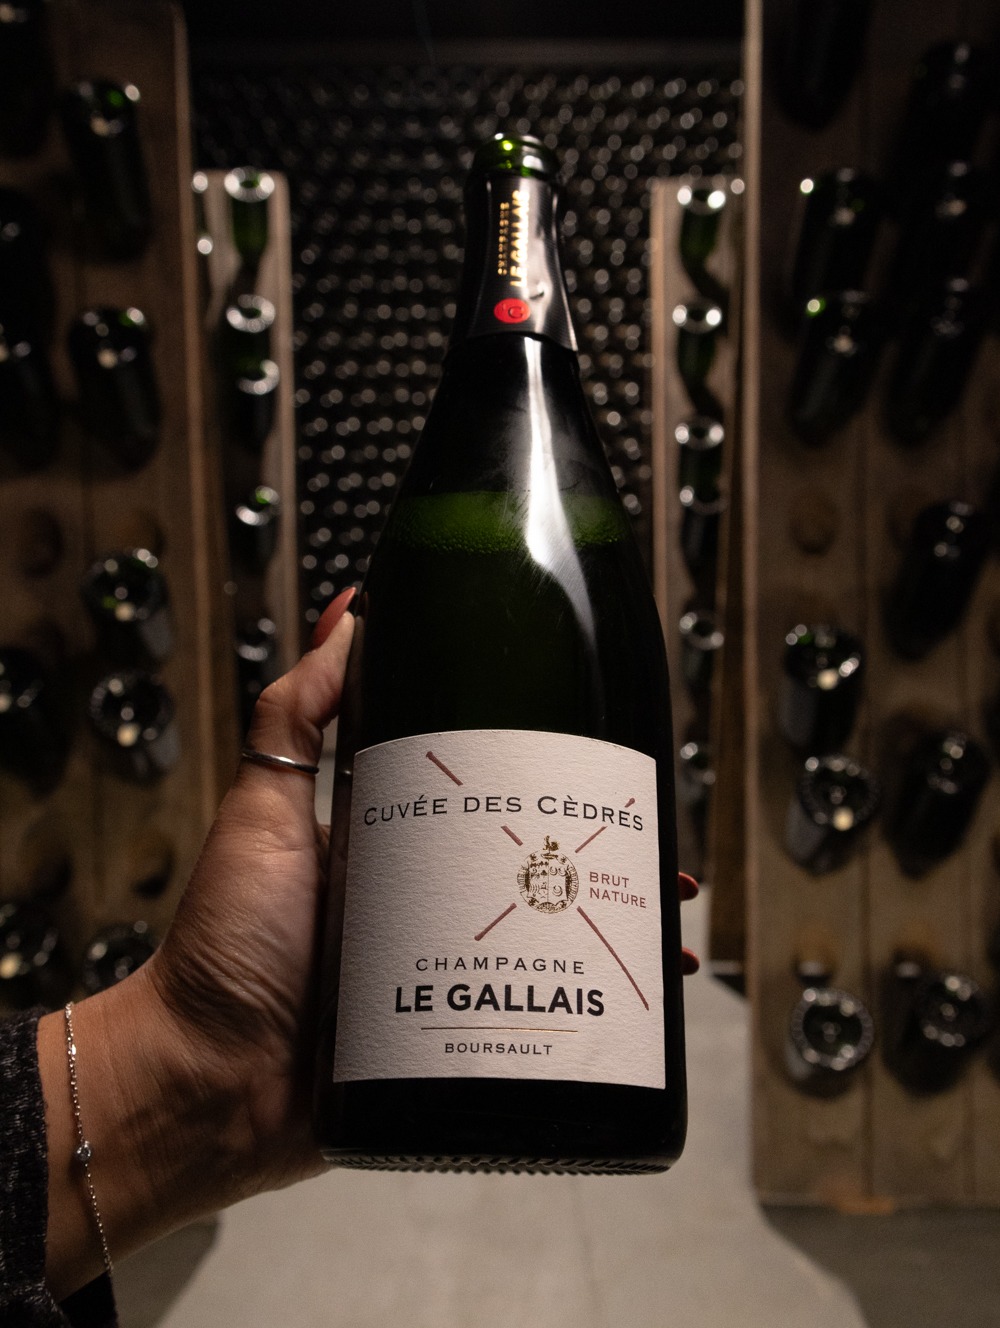 Champagne Le Gallais Cuvée des Cèdres Brut Nature NV																	We’re off to Madame Clicquot’s old stomping grounds in Boursault for a spectacular find on 92 point Brut Nature!